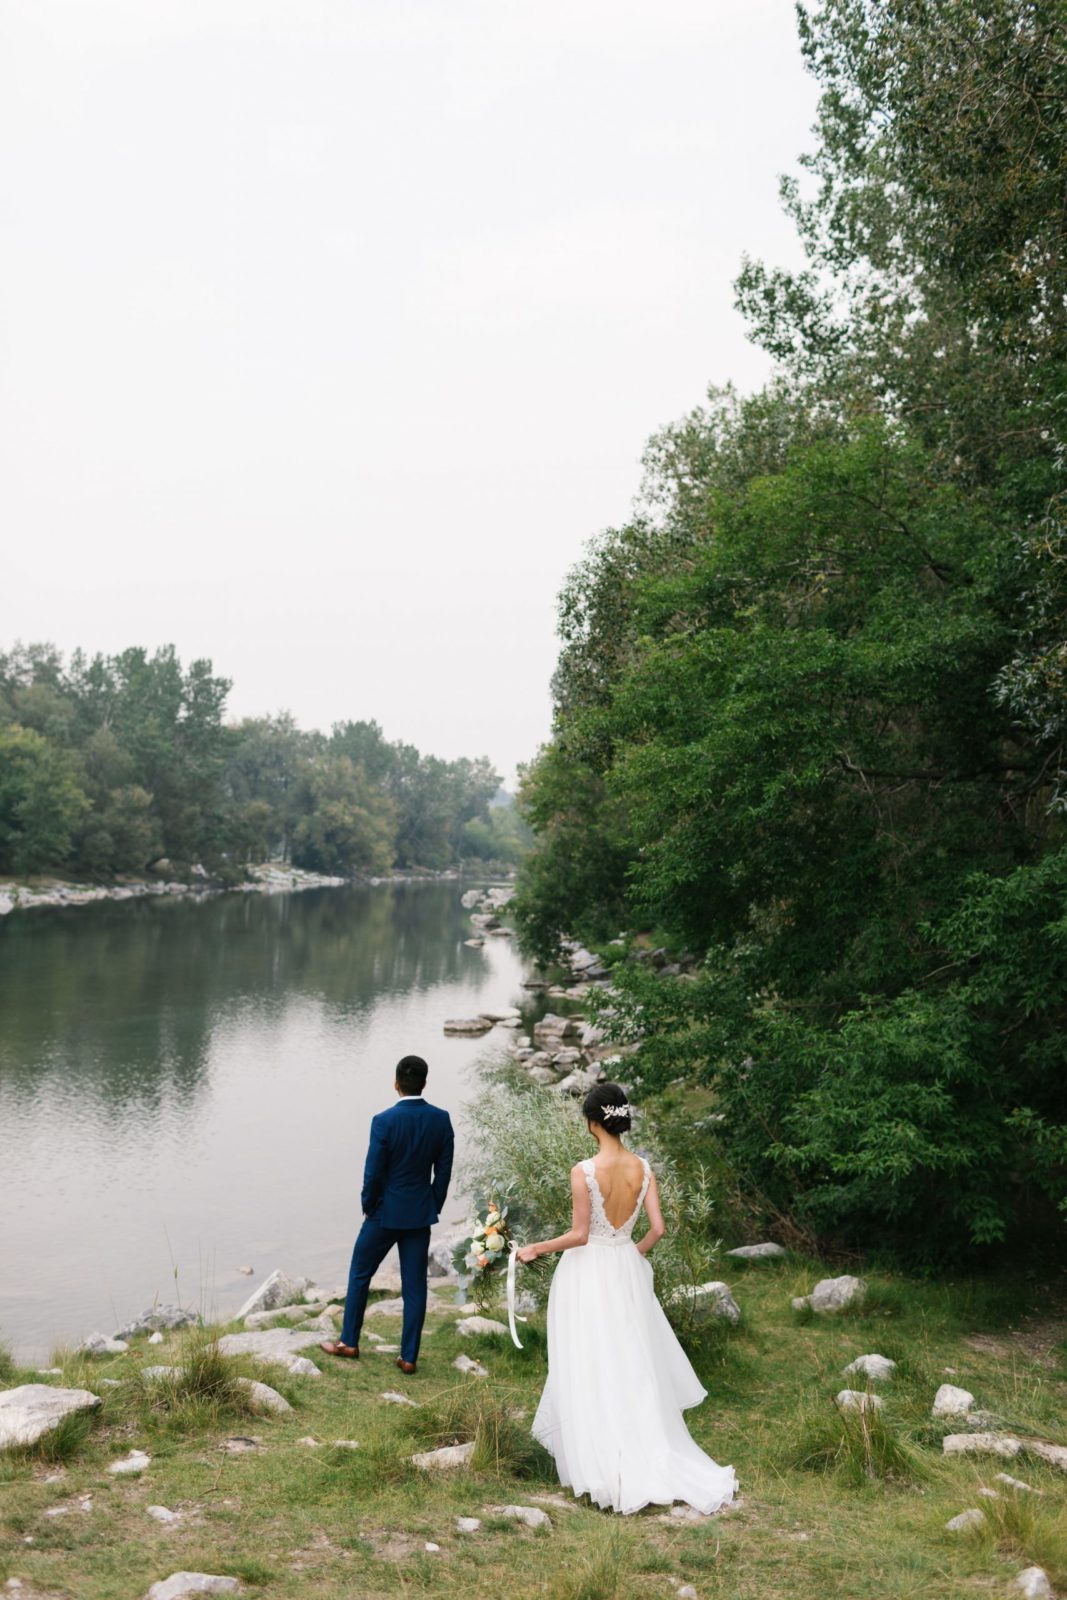 Tips for Choosing Your Wedding Photographer - First Look, Outdoor wedding